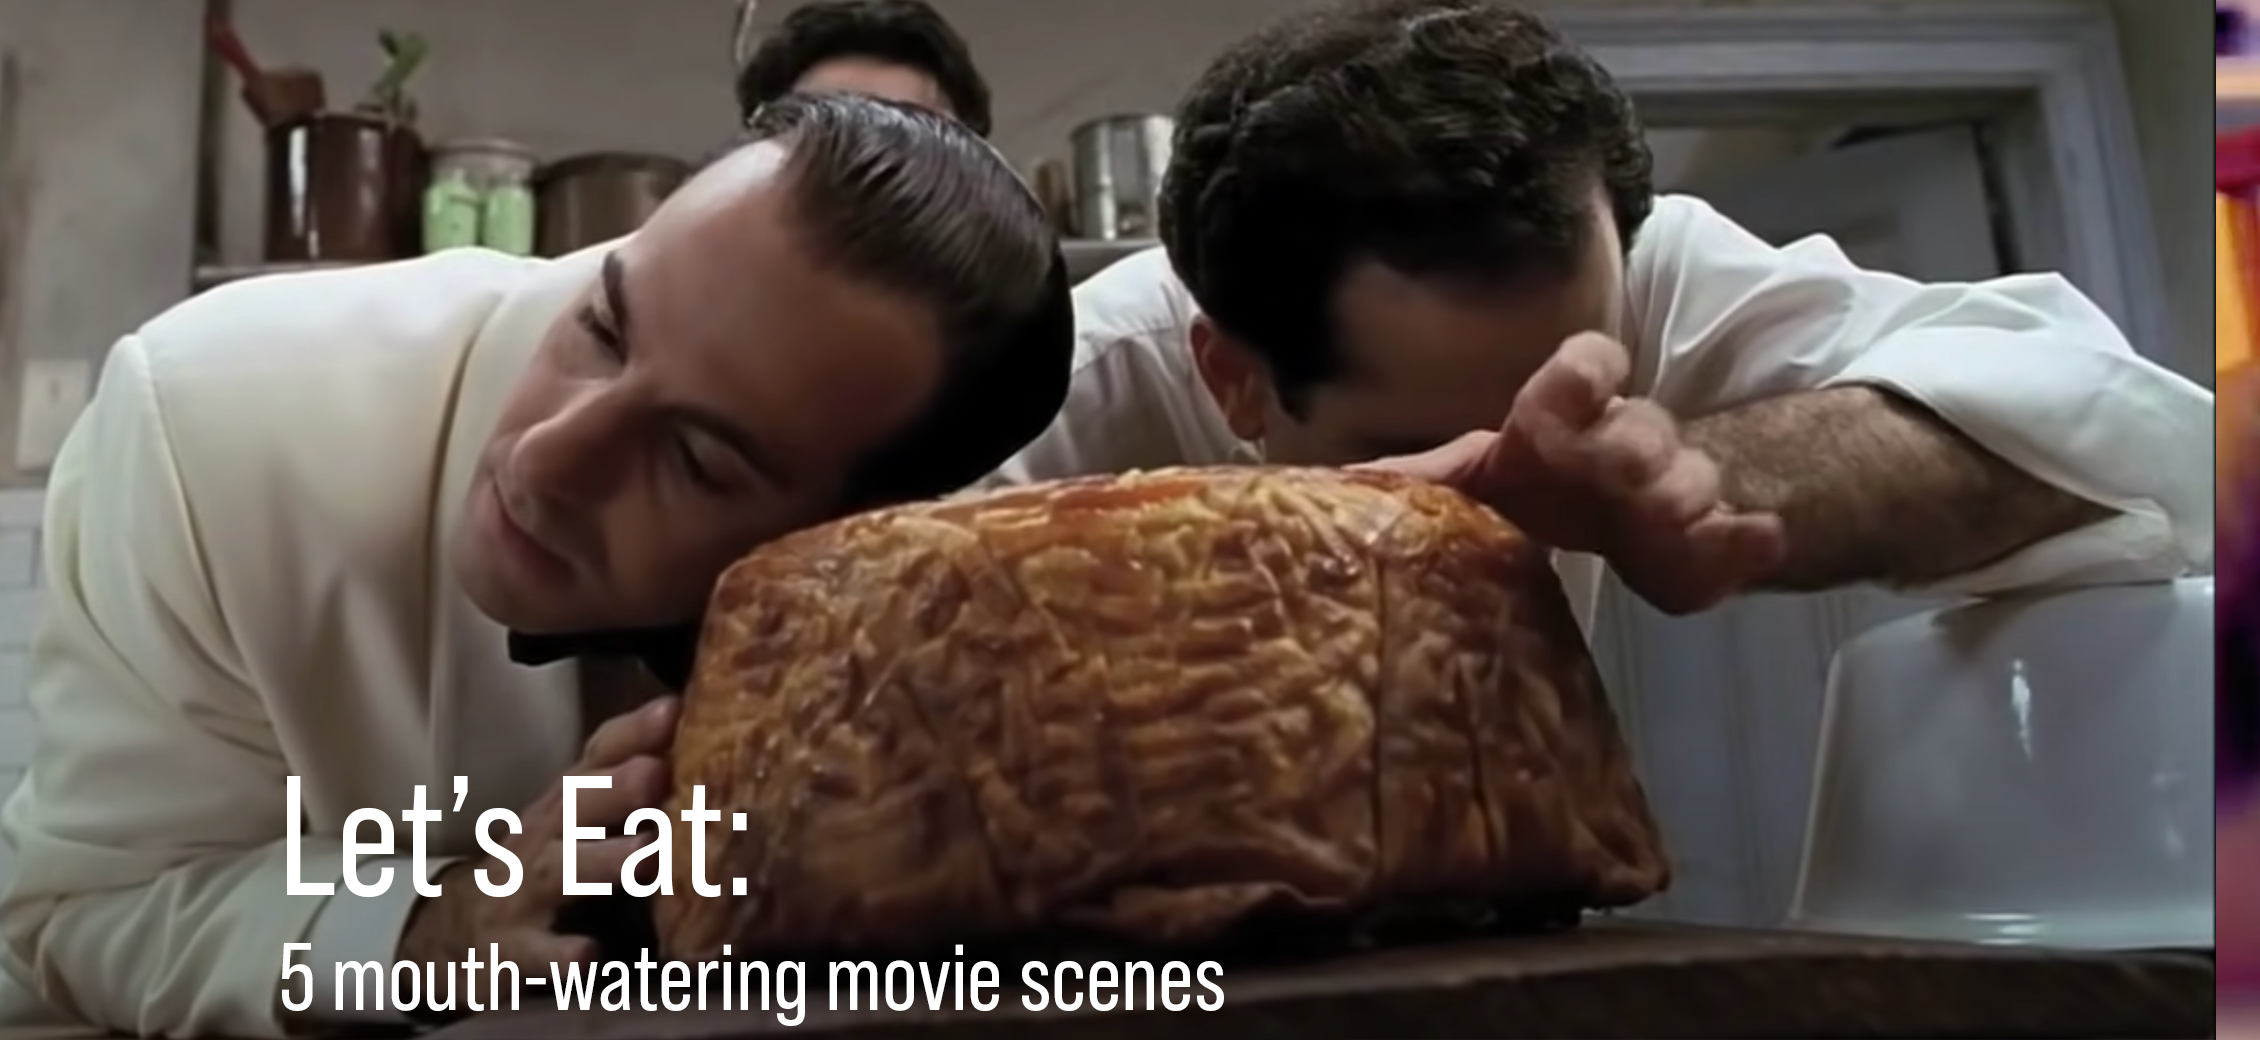 Let’s Eat: 5 mouth-watering movie scenes